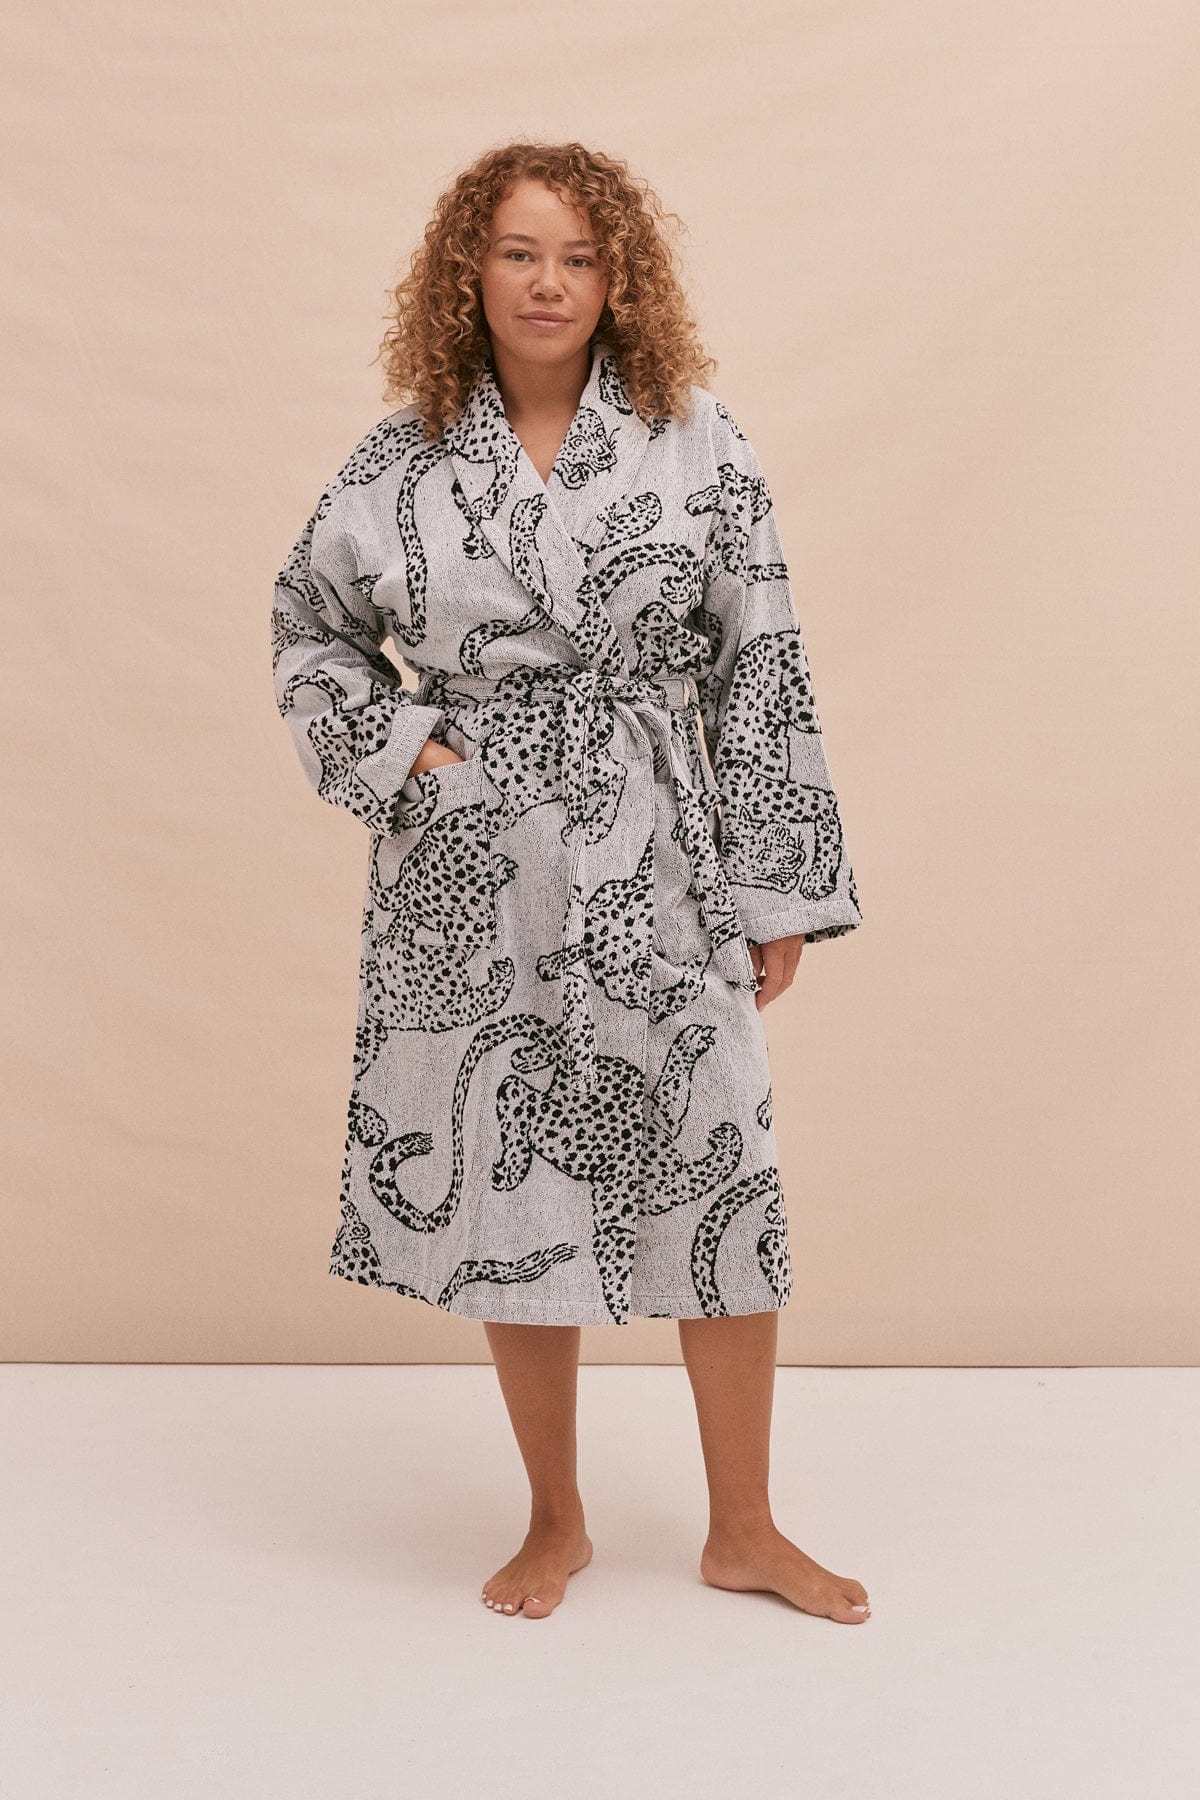 Women's Dressing Gown | Dark Grey | Bown of London – Bown of London Europe